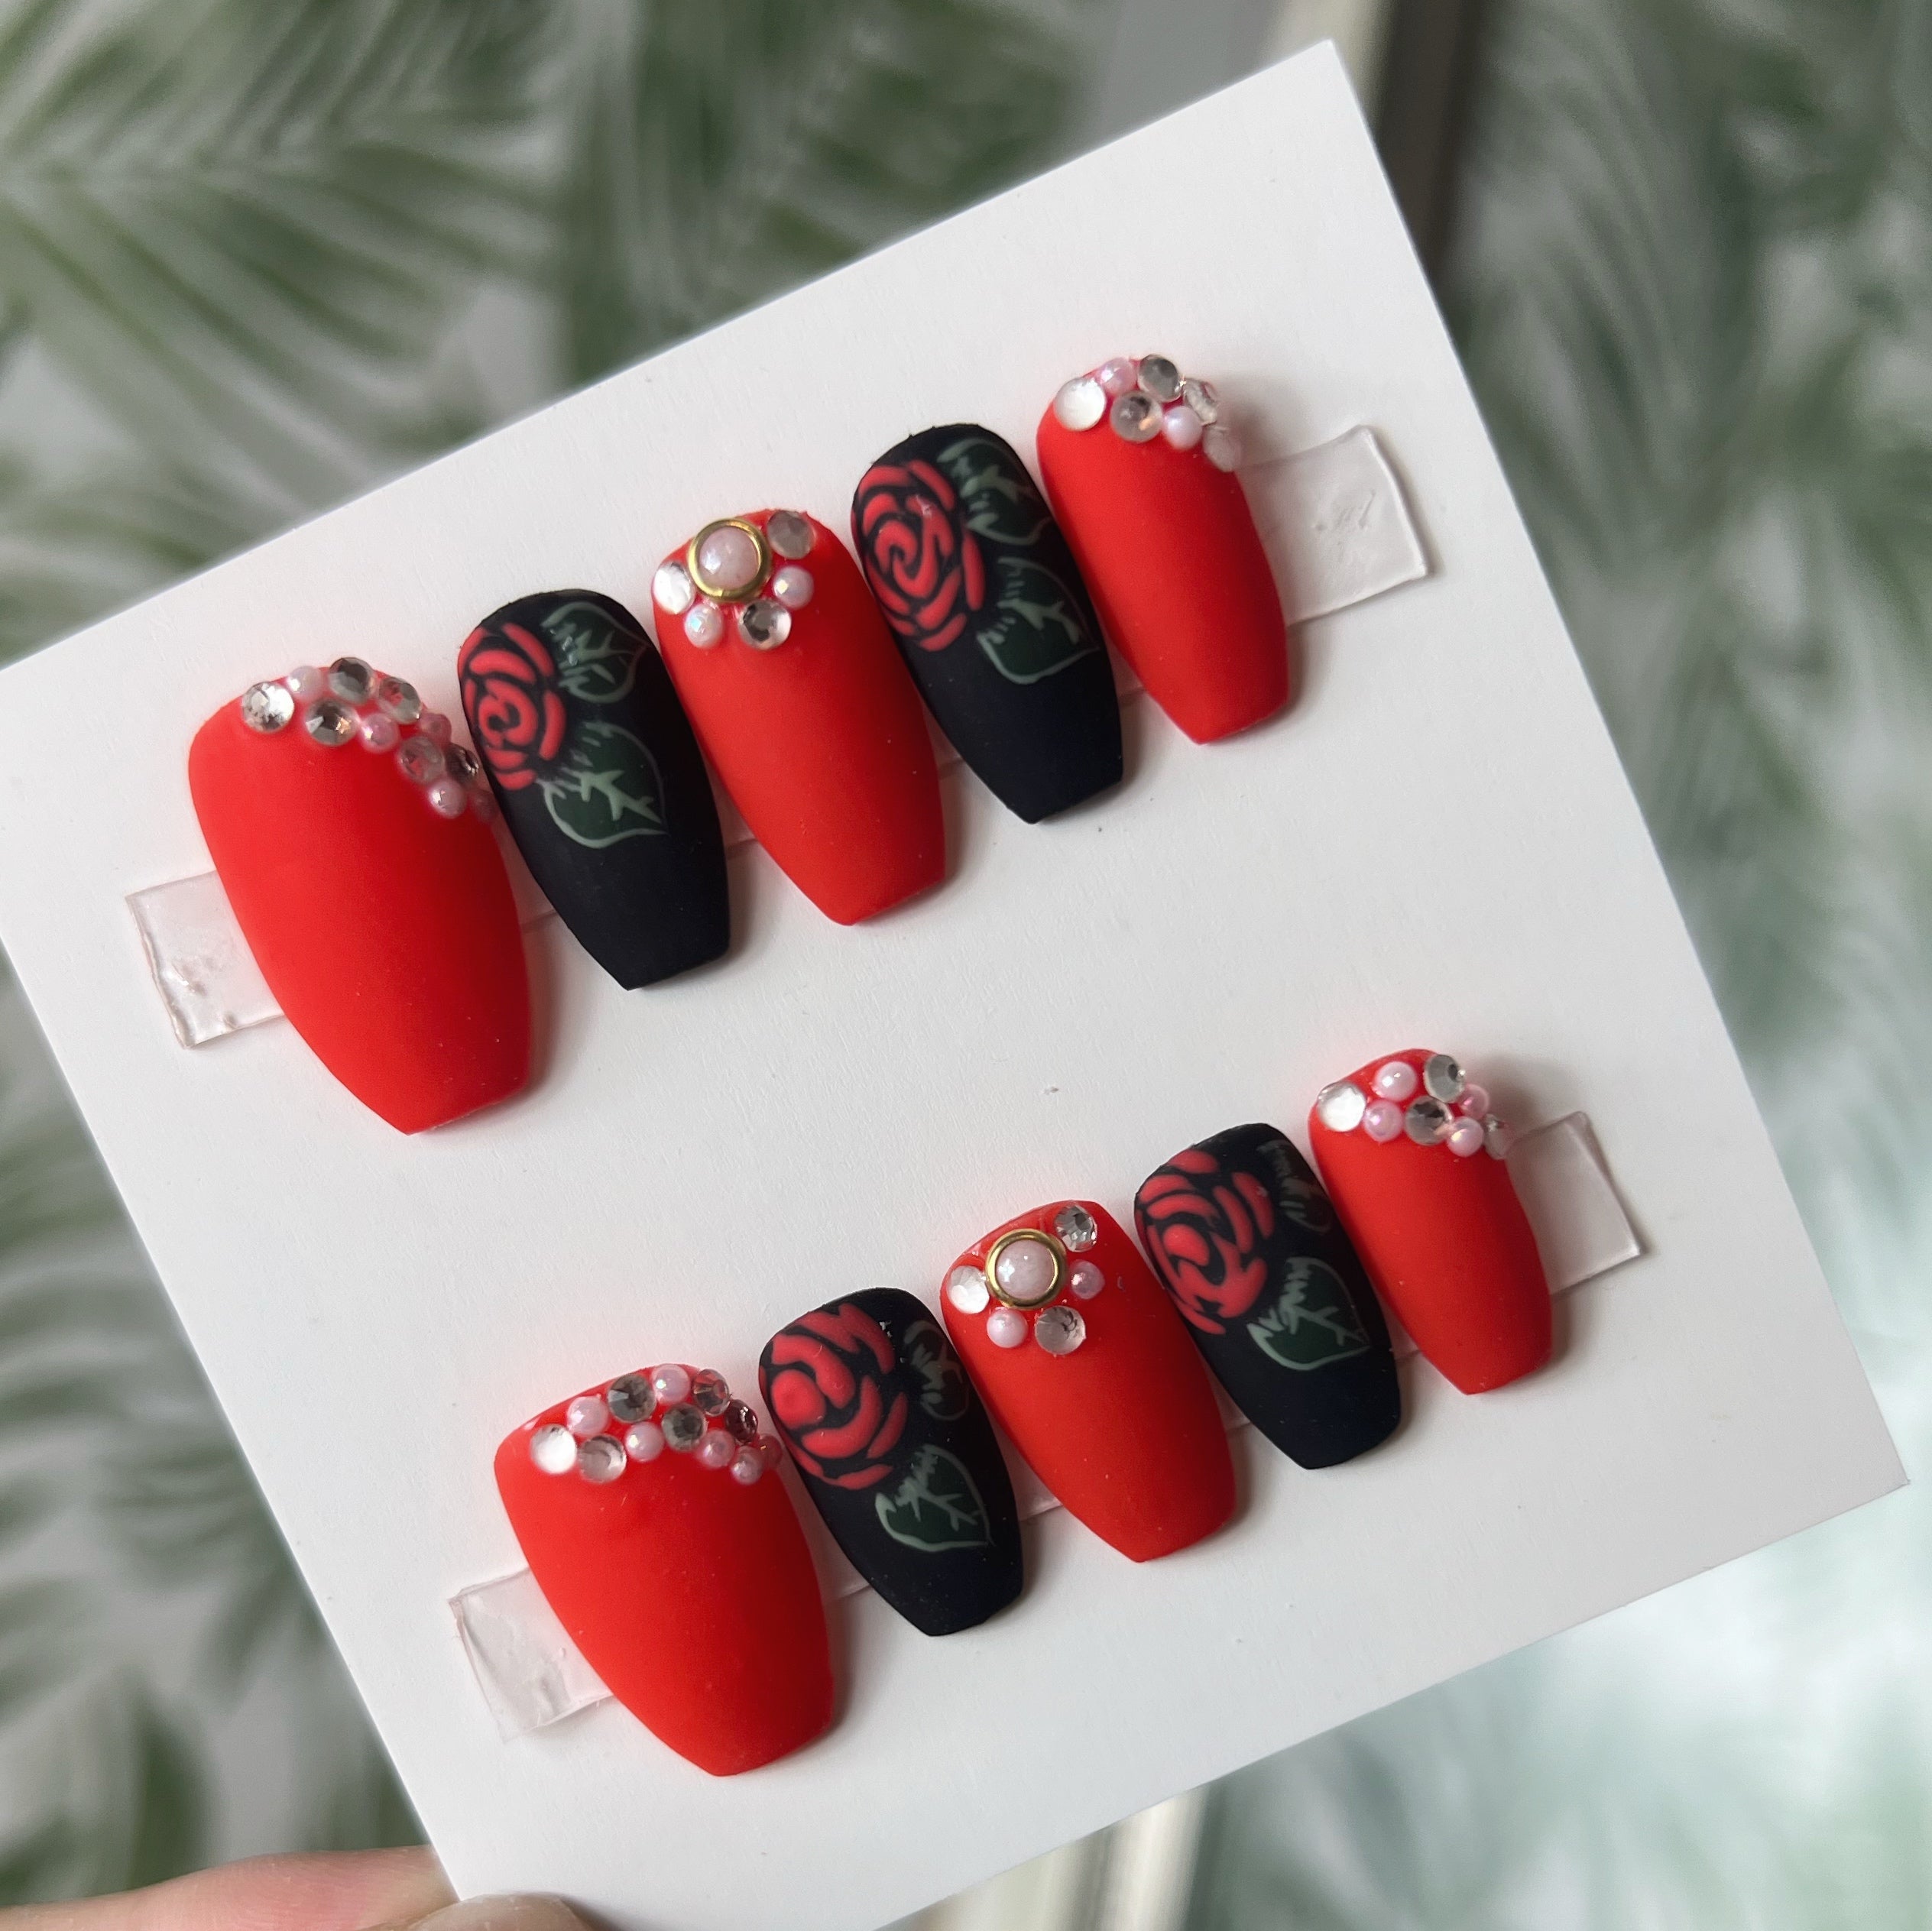 100 Red Nail Ideas For 2024 That Will Make Heads Turn!